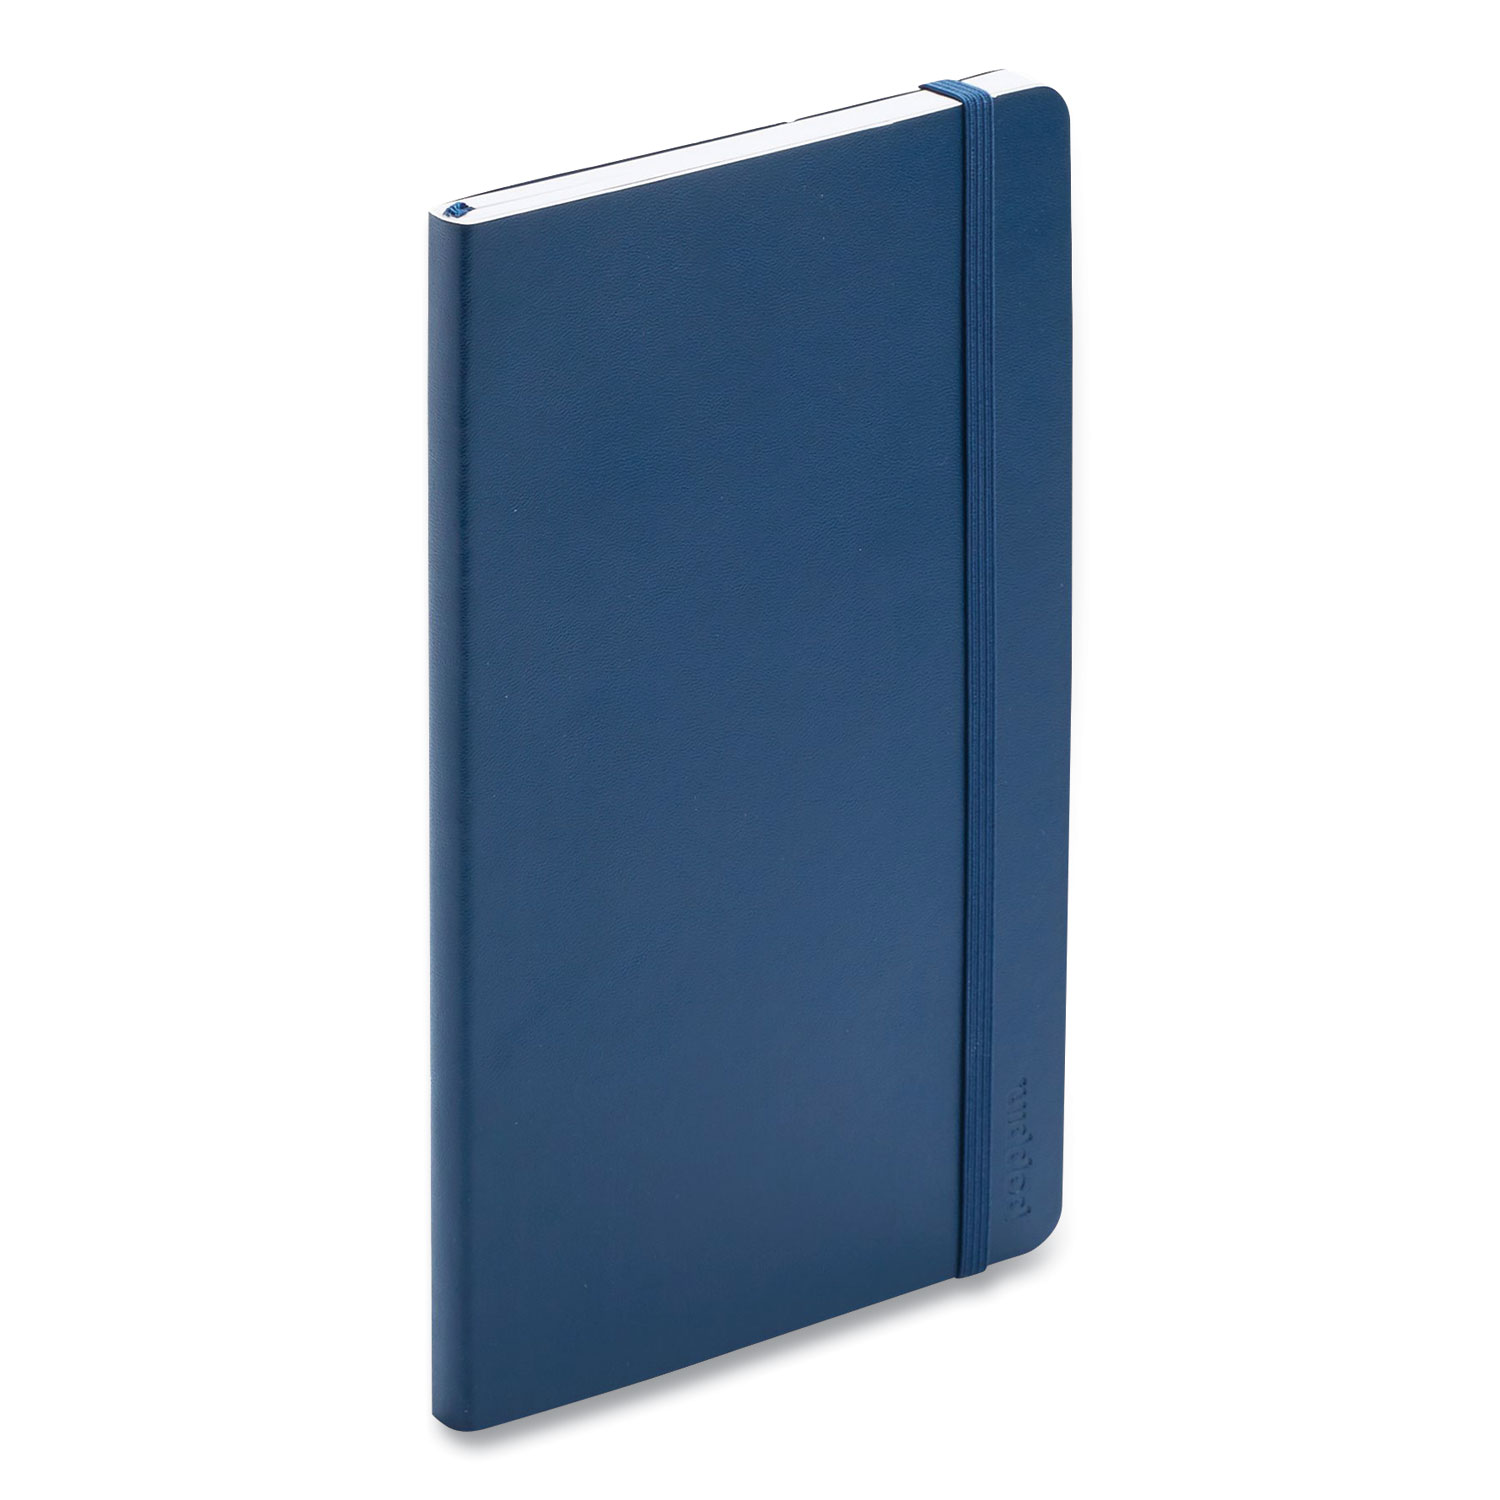 Poppin Professional Notebook, College Rule, Navy 8.25 x 5, 96 Sheets